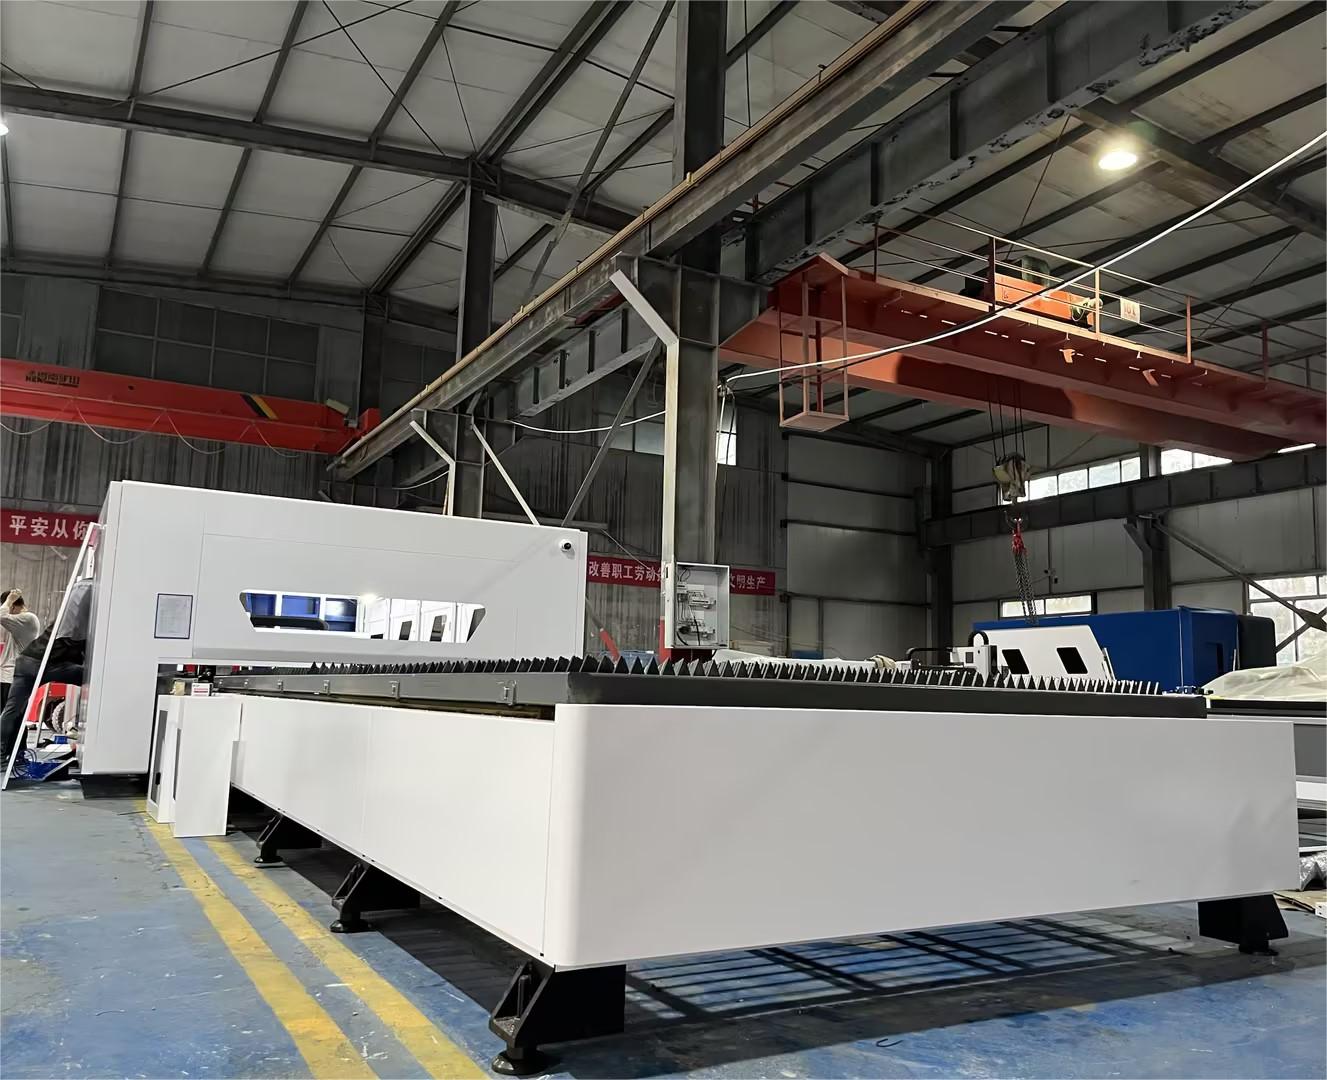 GXLASER cutting machine: A Powerful Tool for Modern Manufacturing